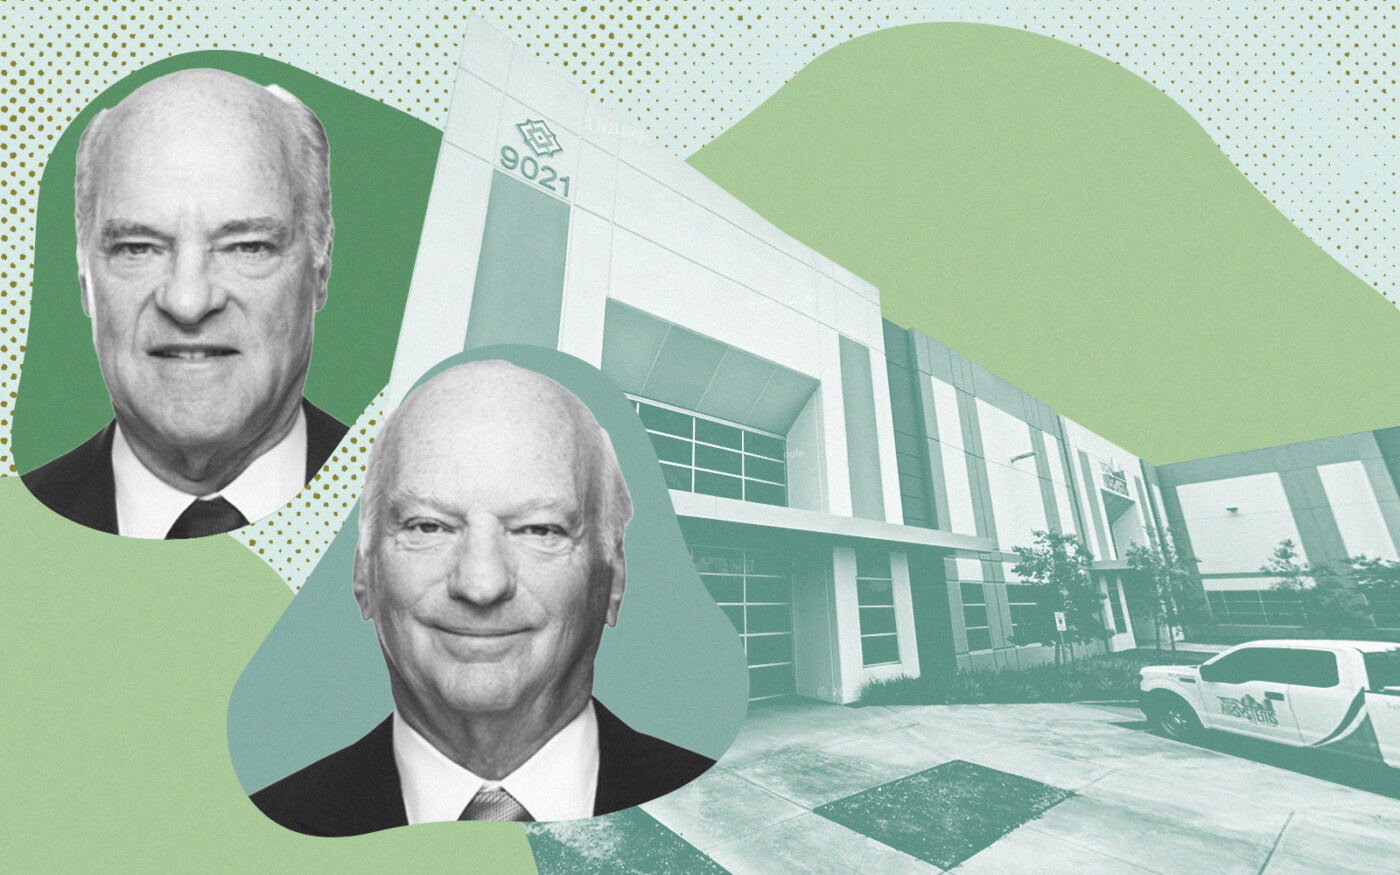 KKR Buys Houston Industrial Complex For $234M